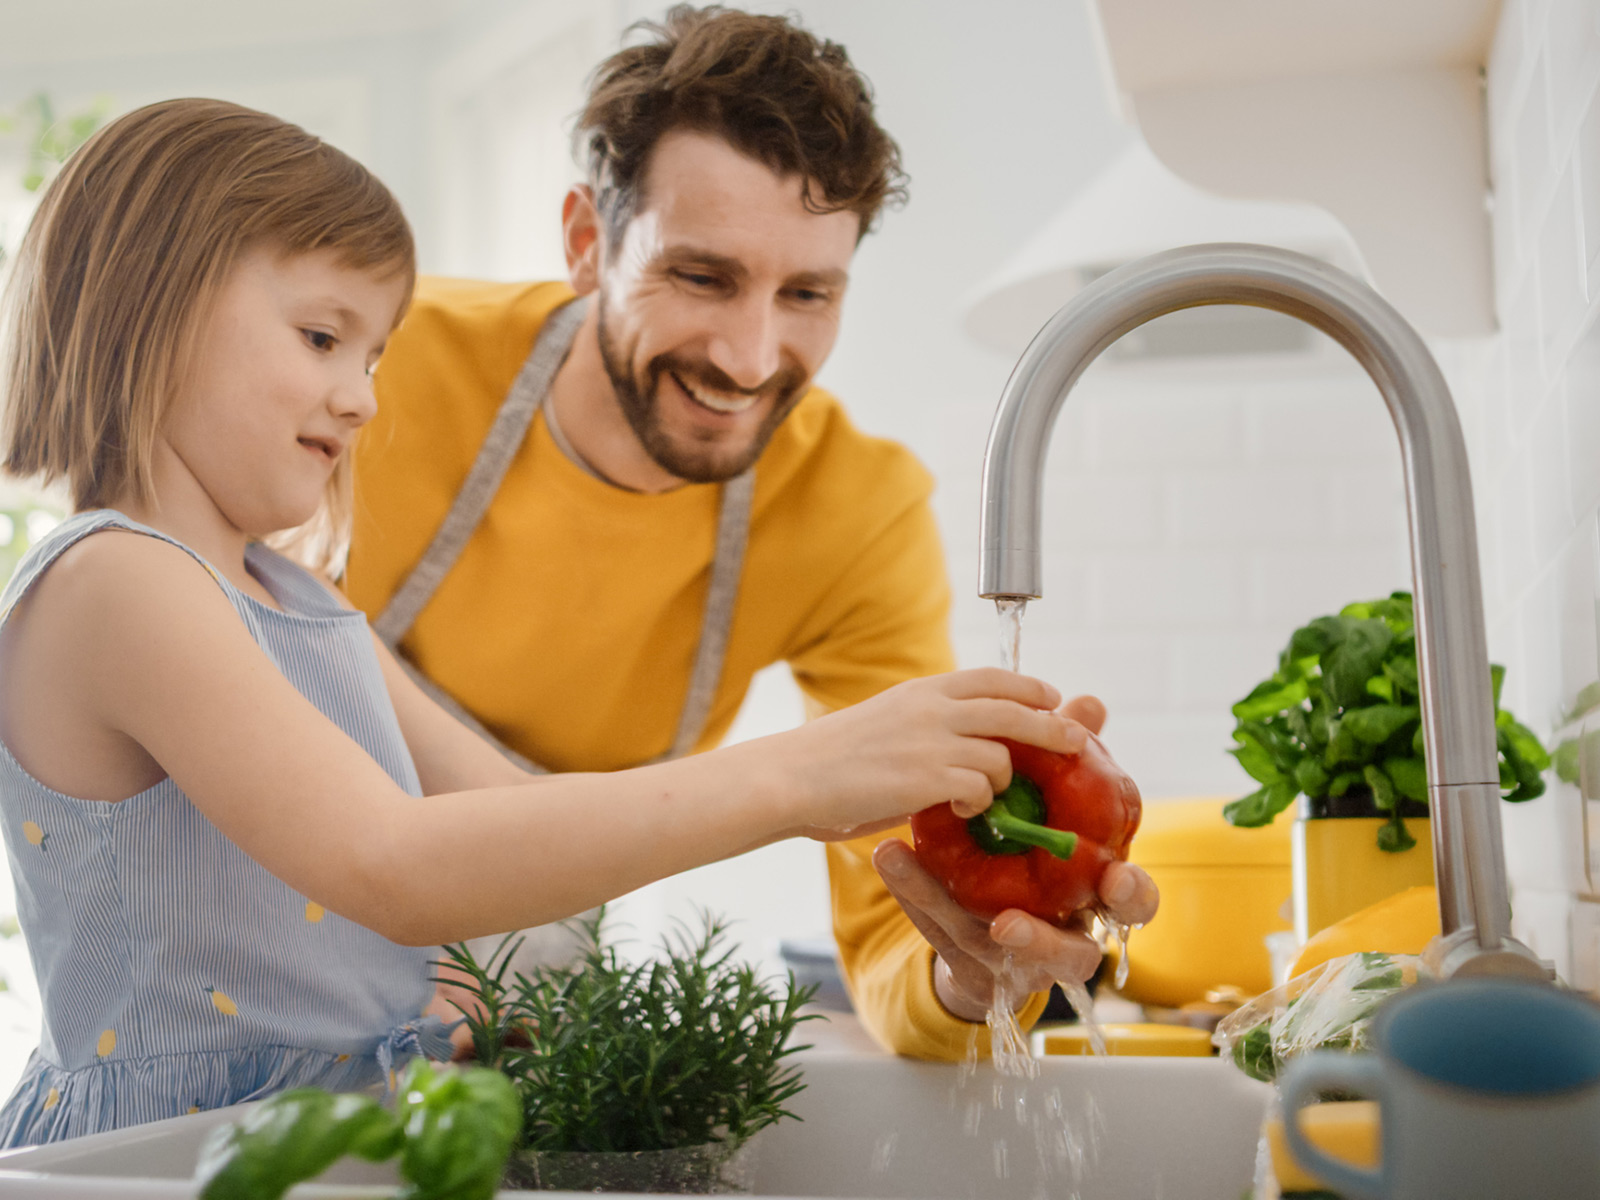 Father smiles while he helps young daughter clean vegetables in the kitchen sink